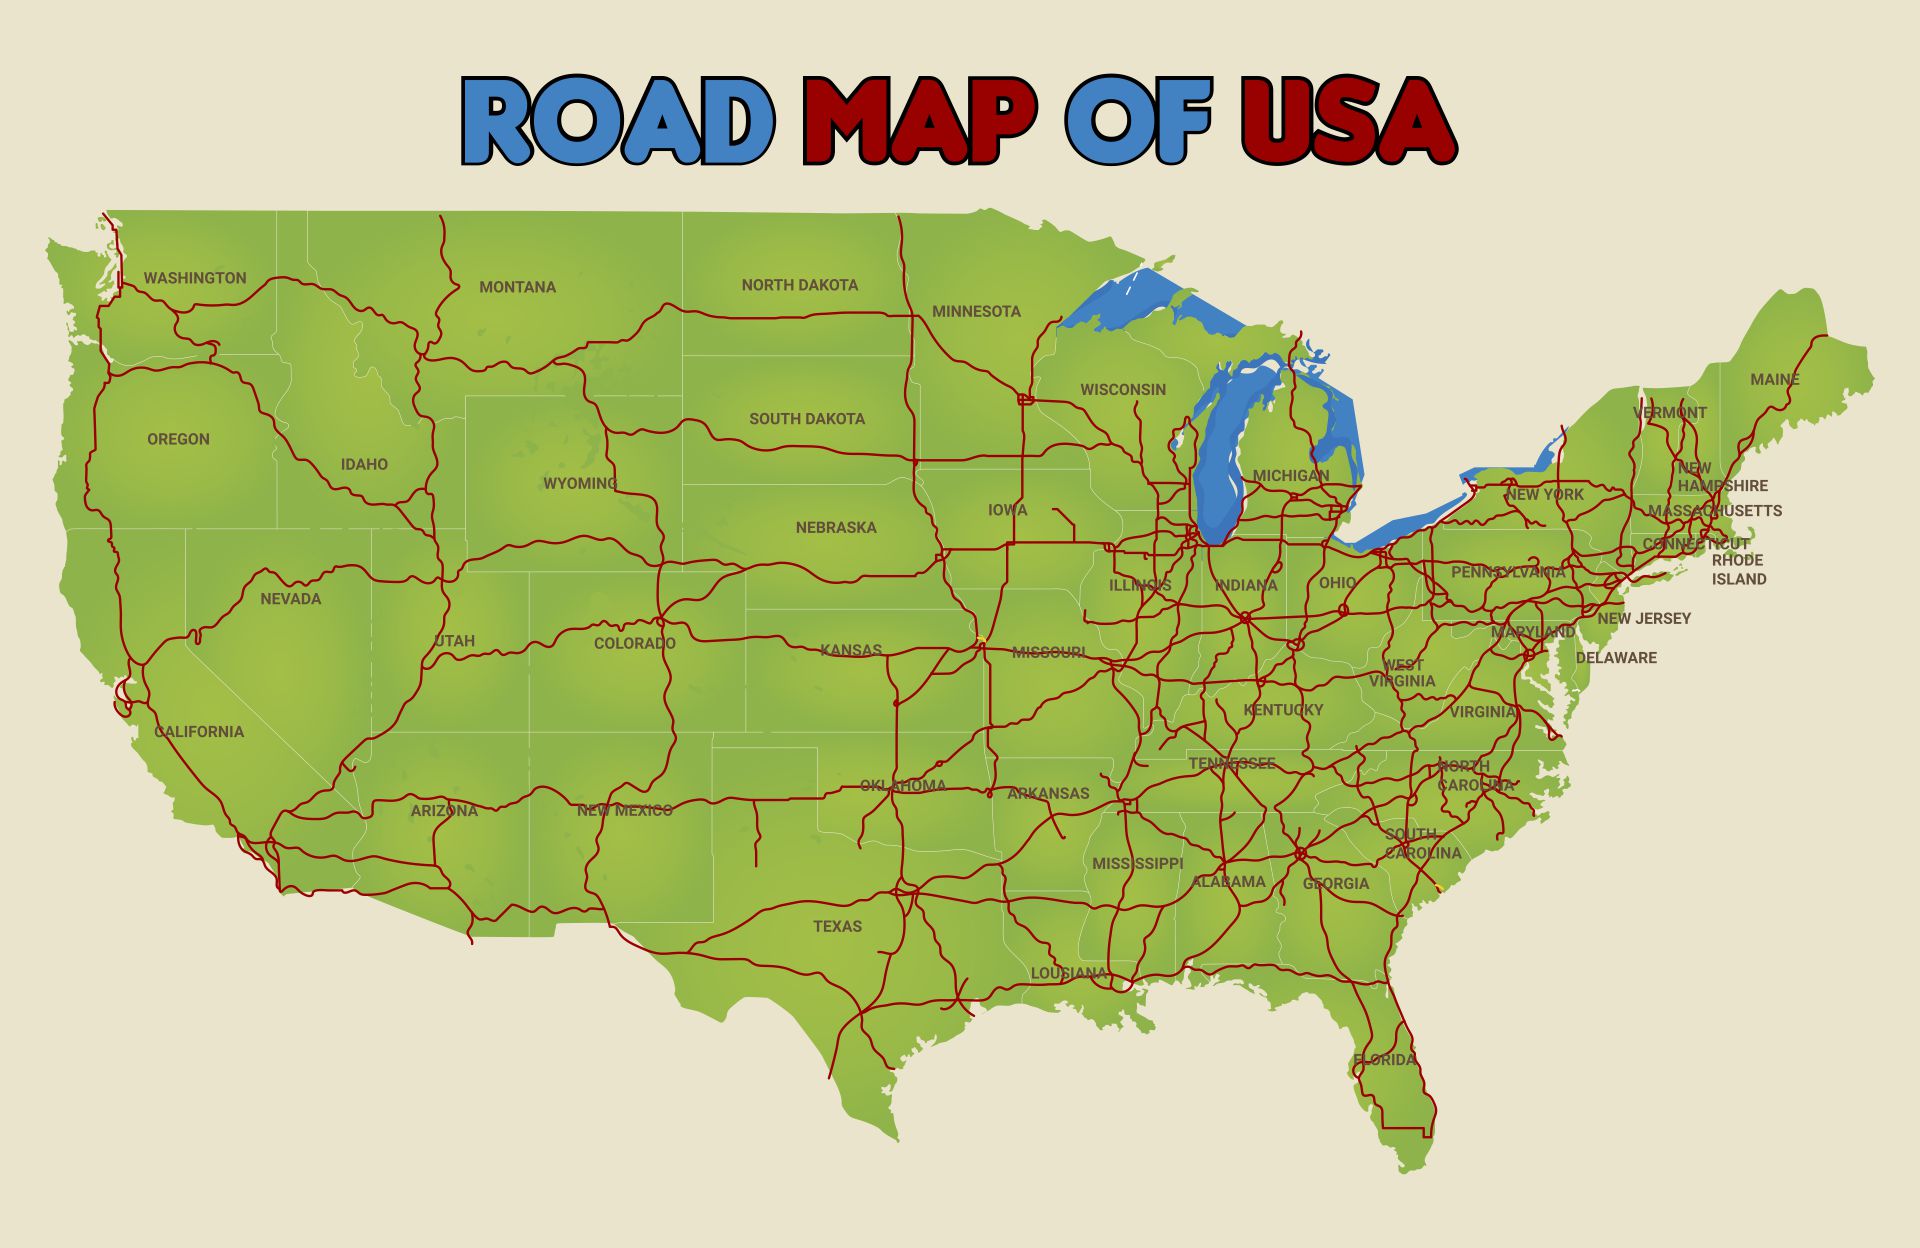 6 Best Images of Free Printable US Road Maps - United States Road Map